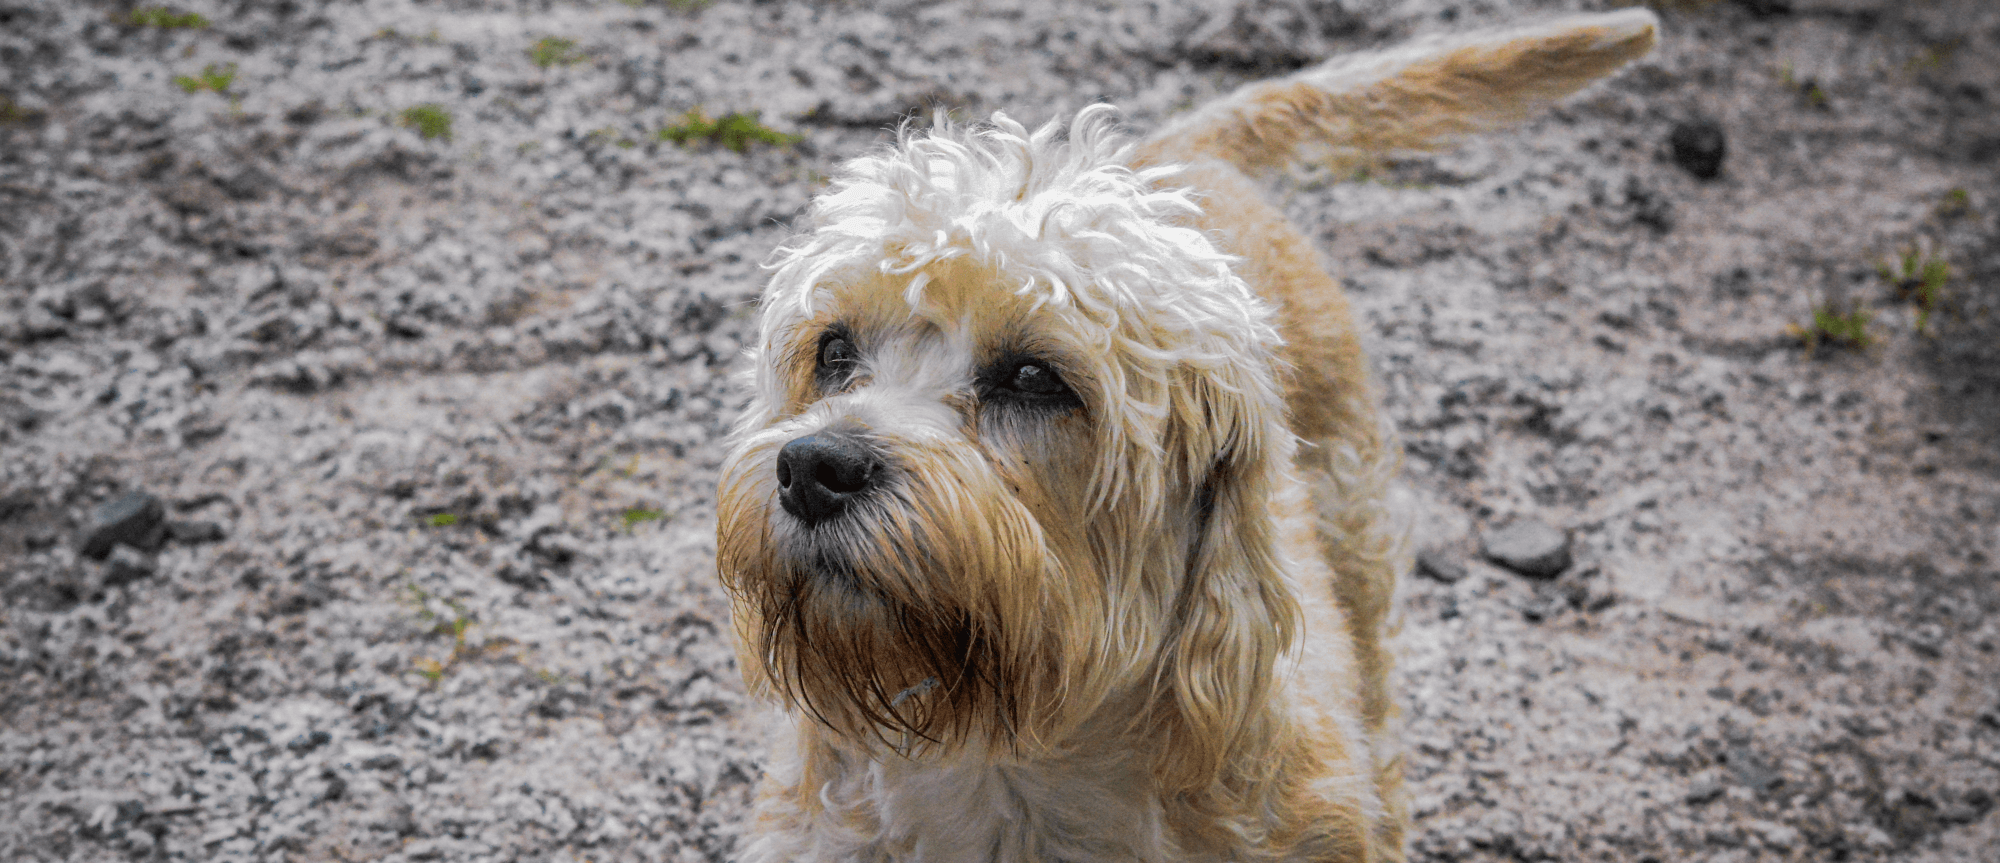 a dog with white fur standing on mud